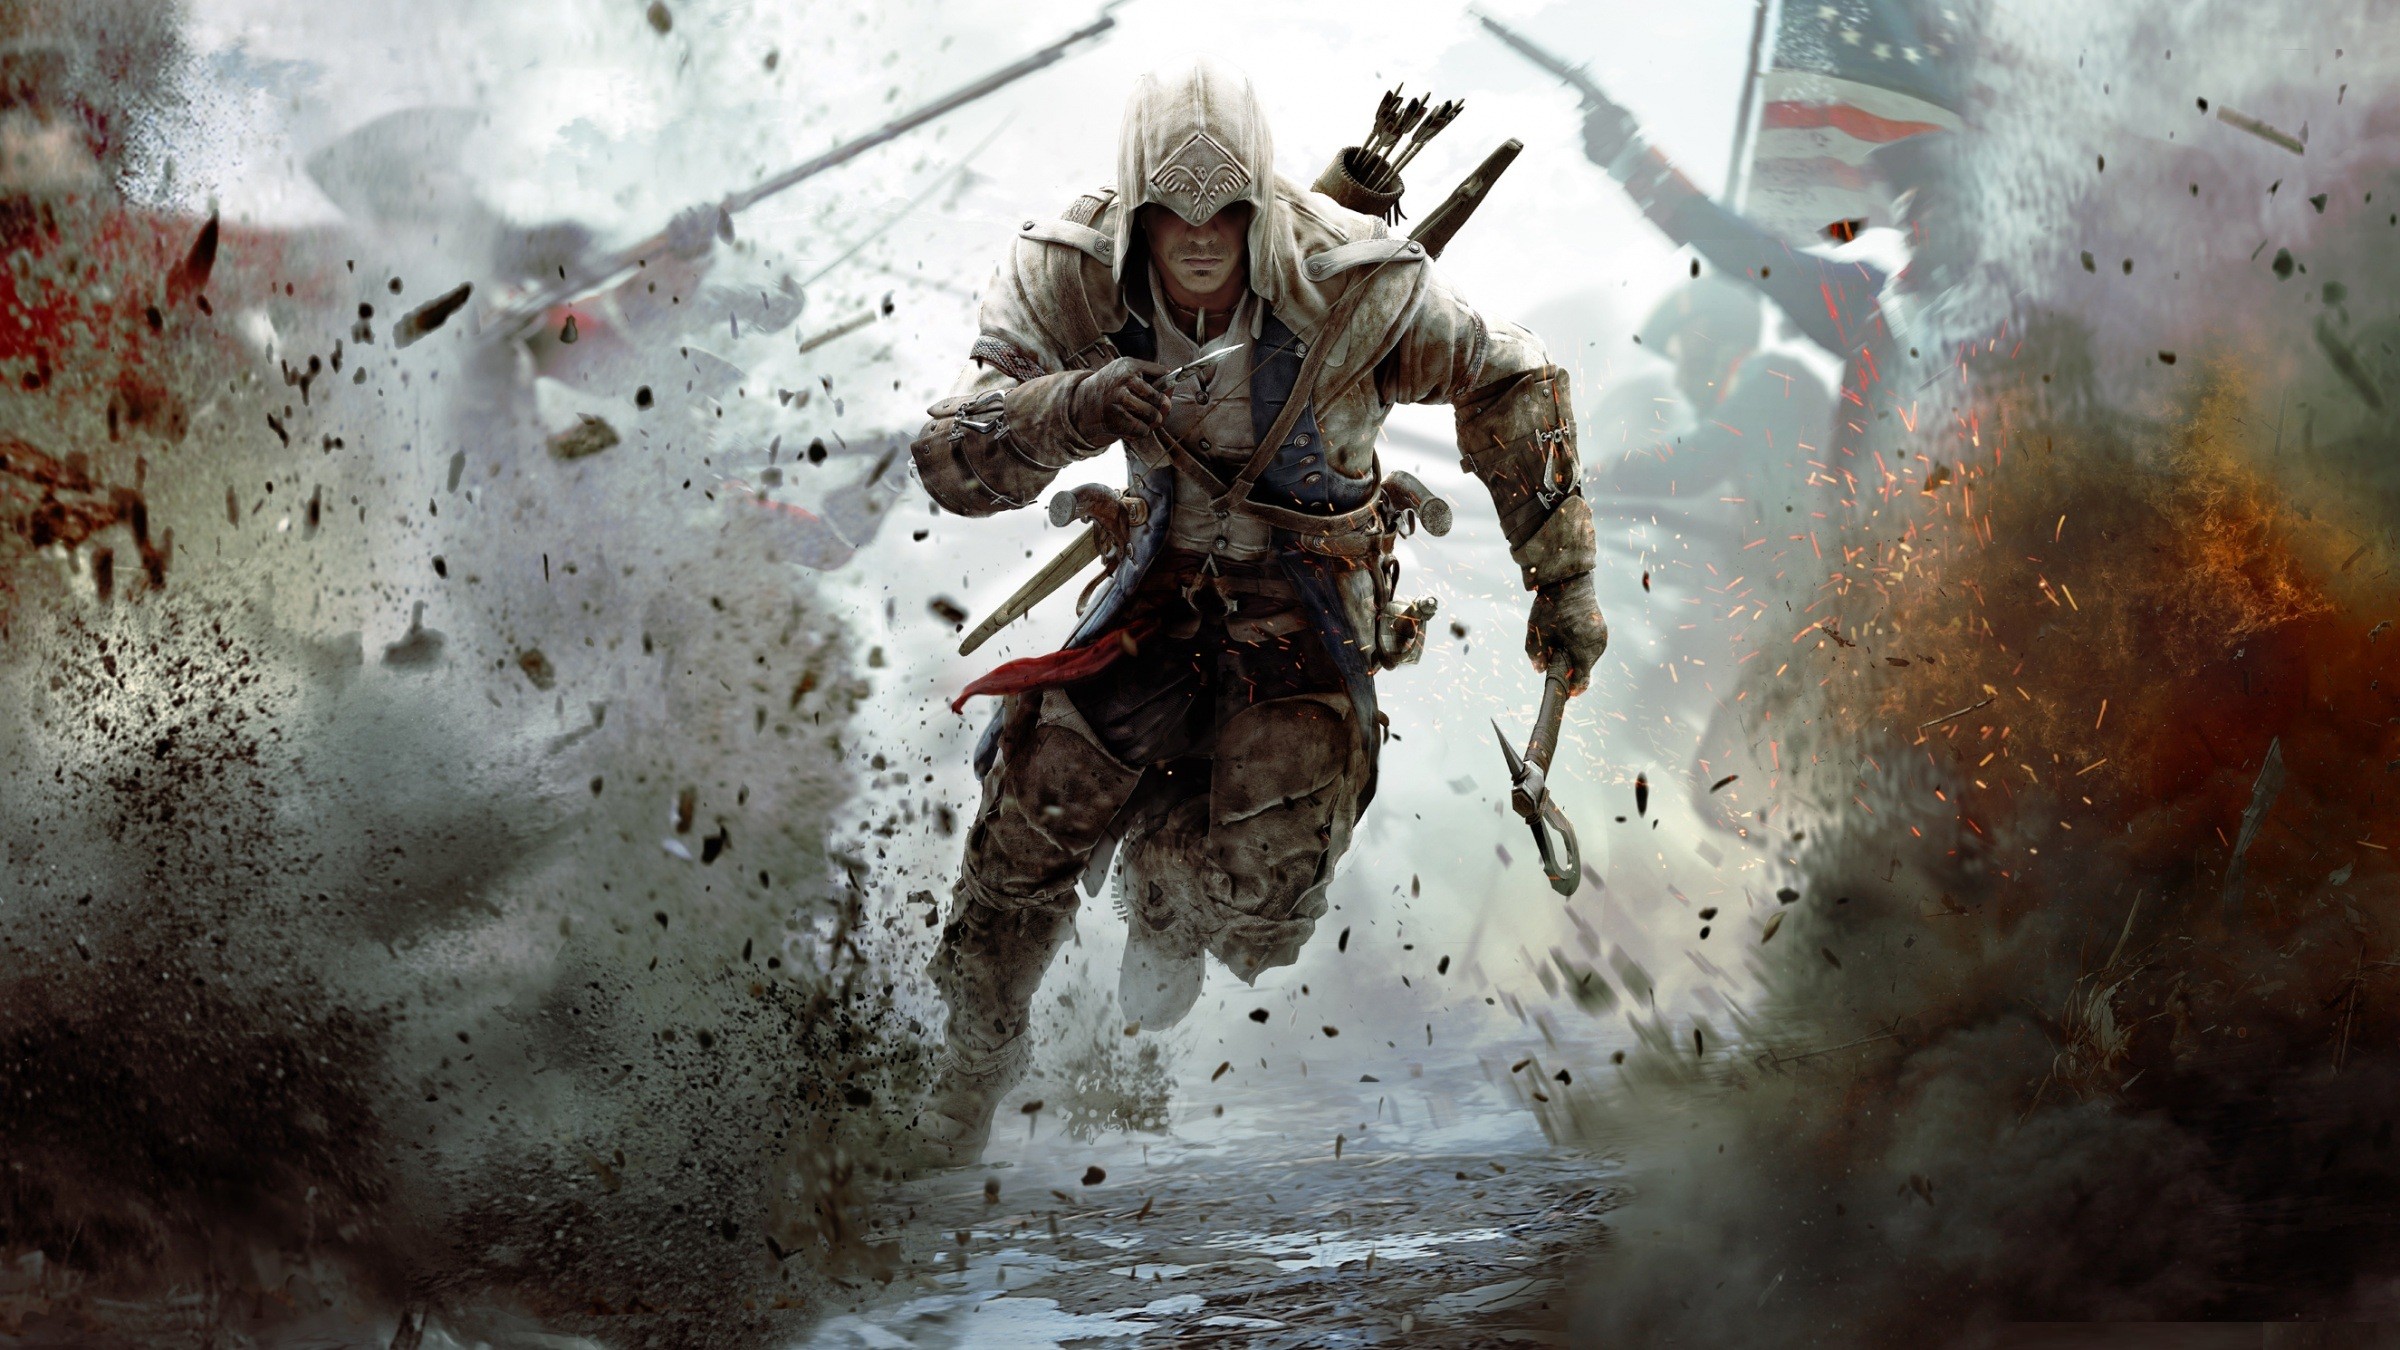 HD Wallpapers Widescreen 1080P 3D Creed 3 Game HD Widescreen Wallpapers